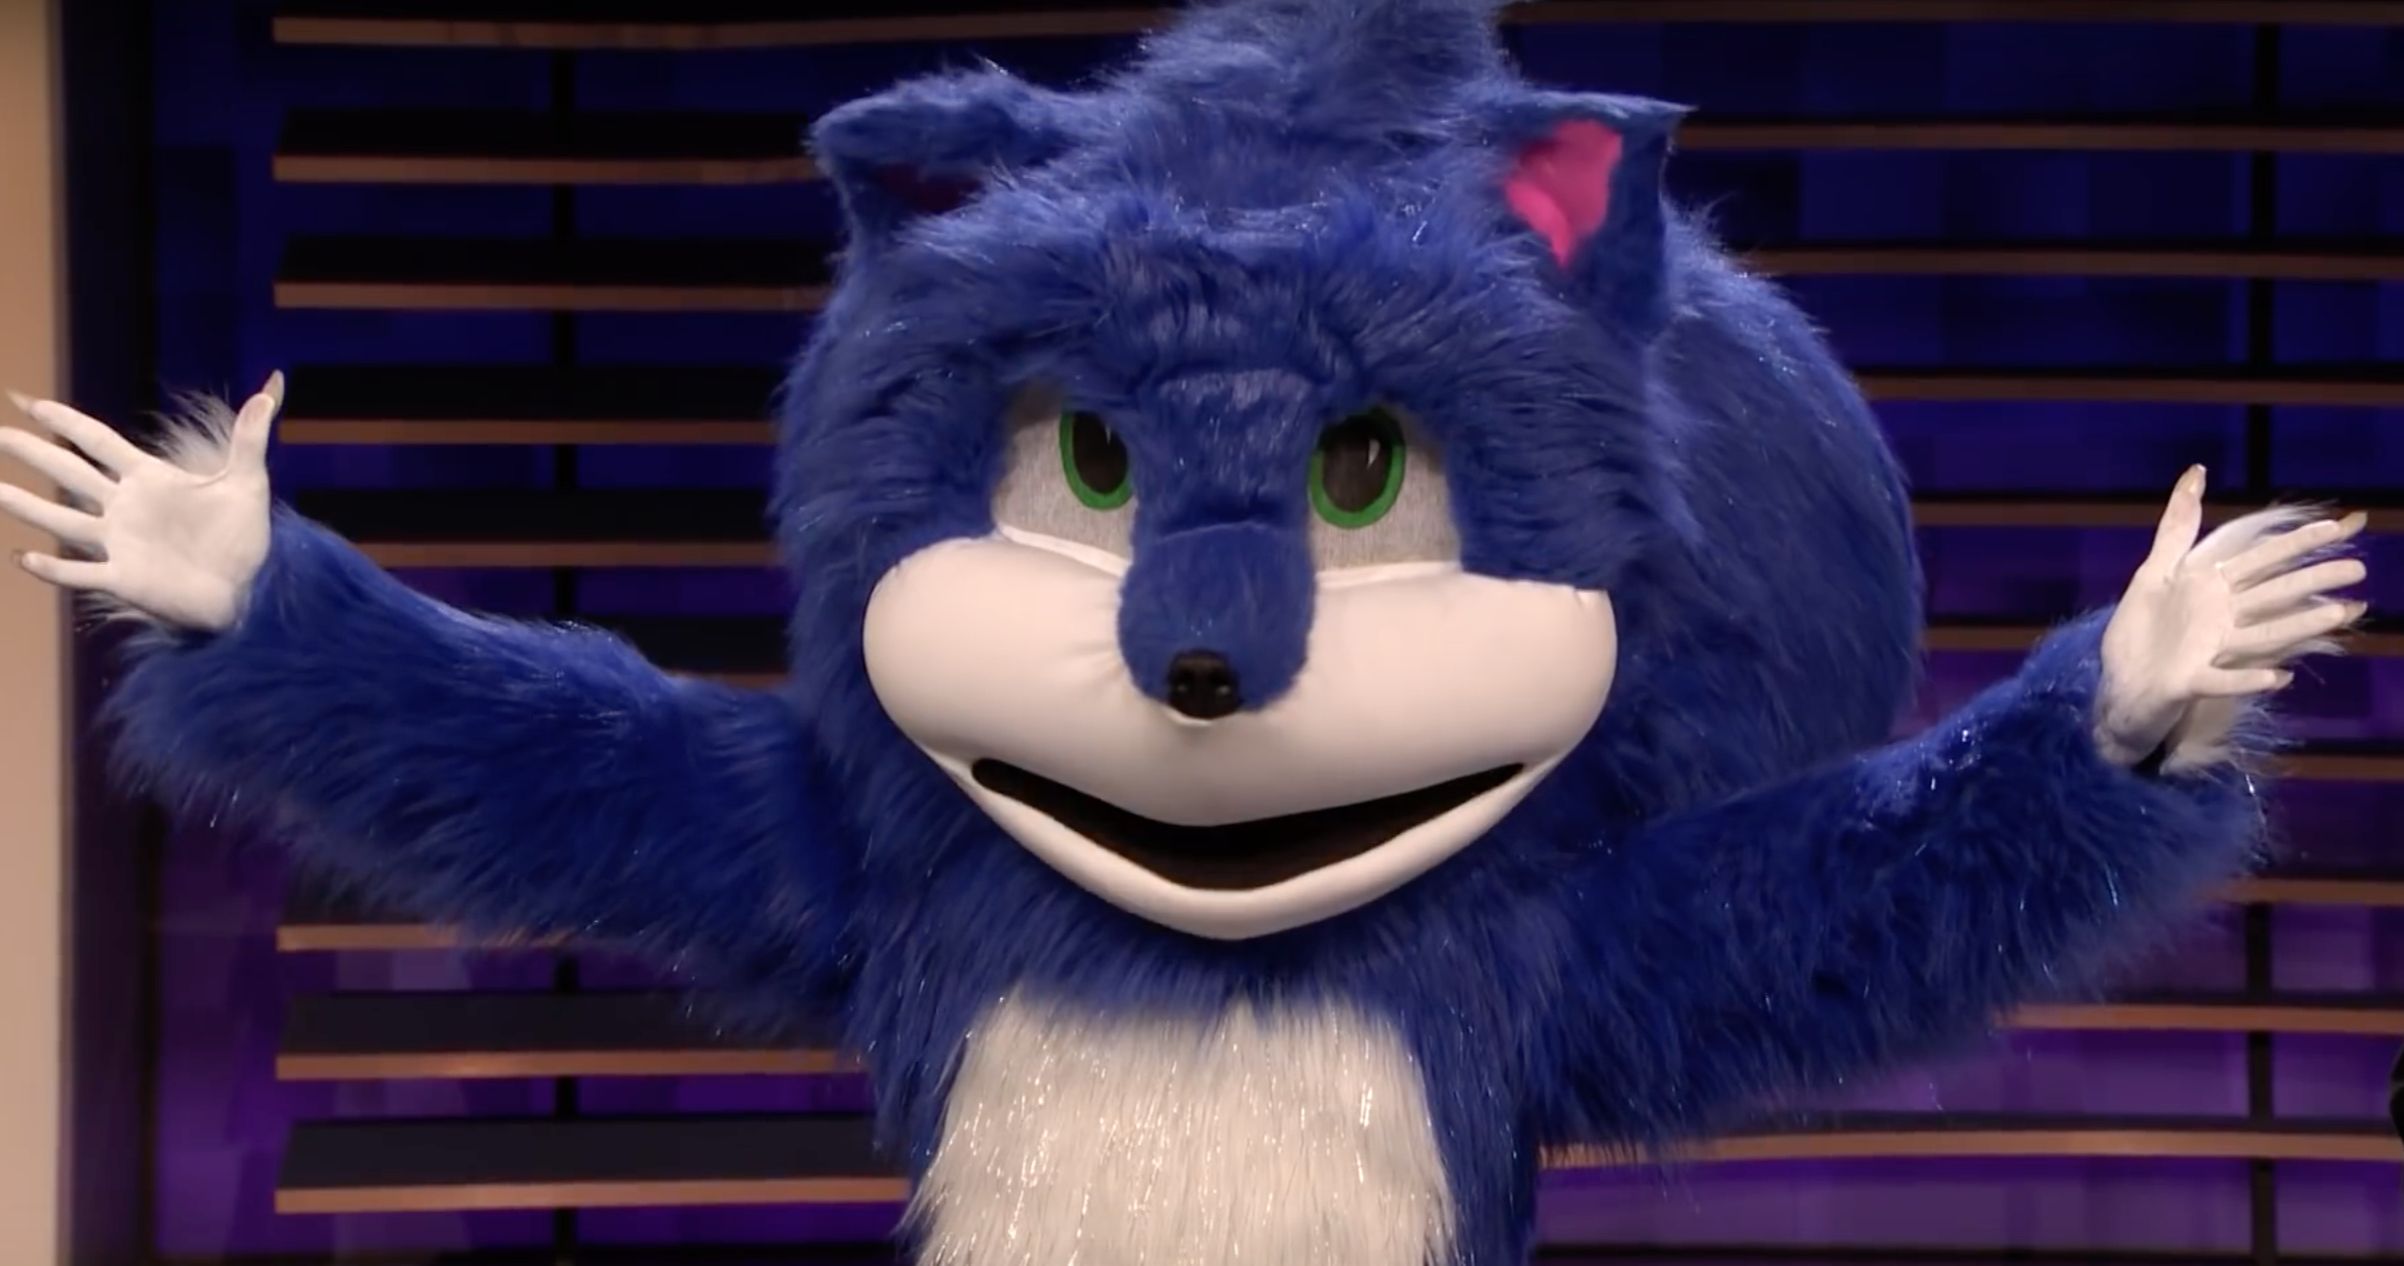 Conan Trolls Sonic the Hedgehog Haters with New NSFW Redesign